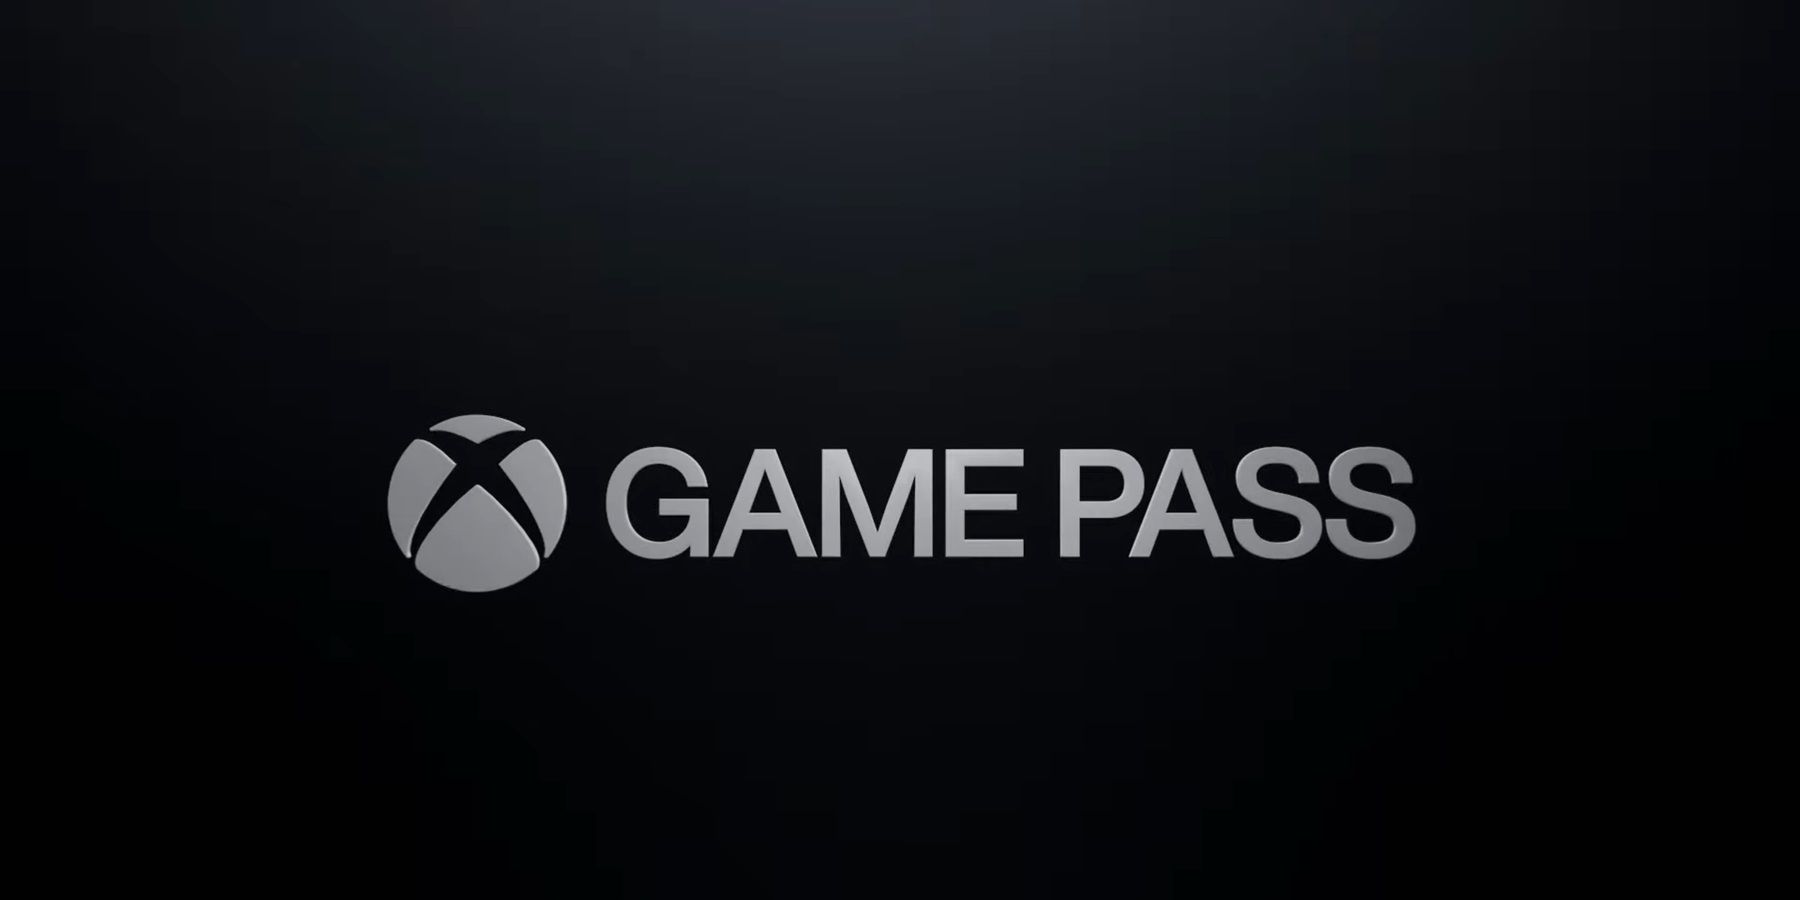 Xbox Game Pass Lineup for December 2023 Includes Far Cry 6